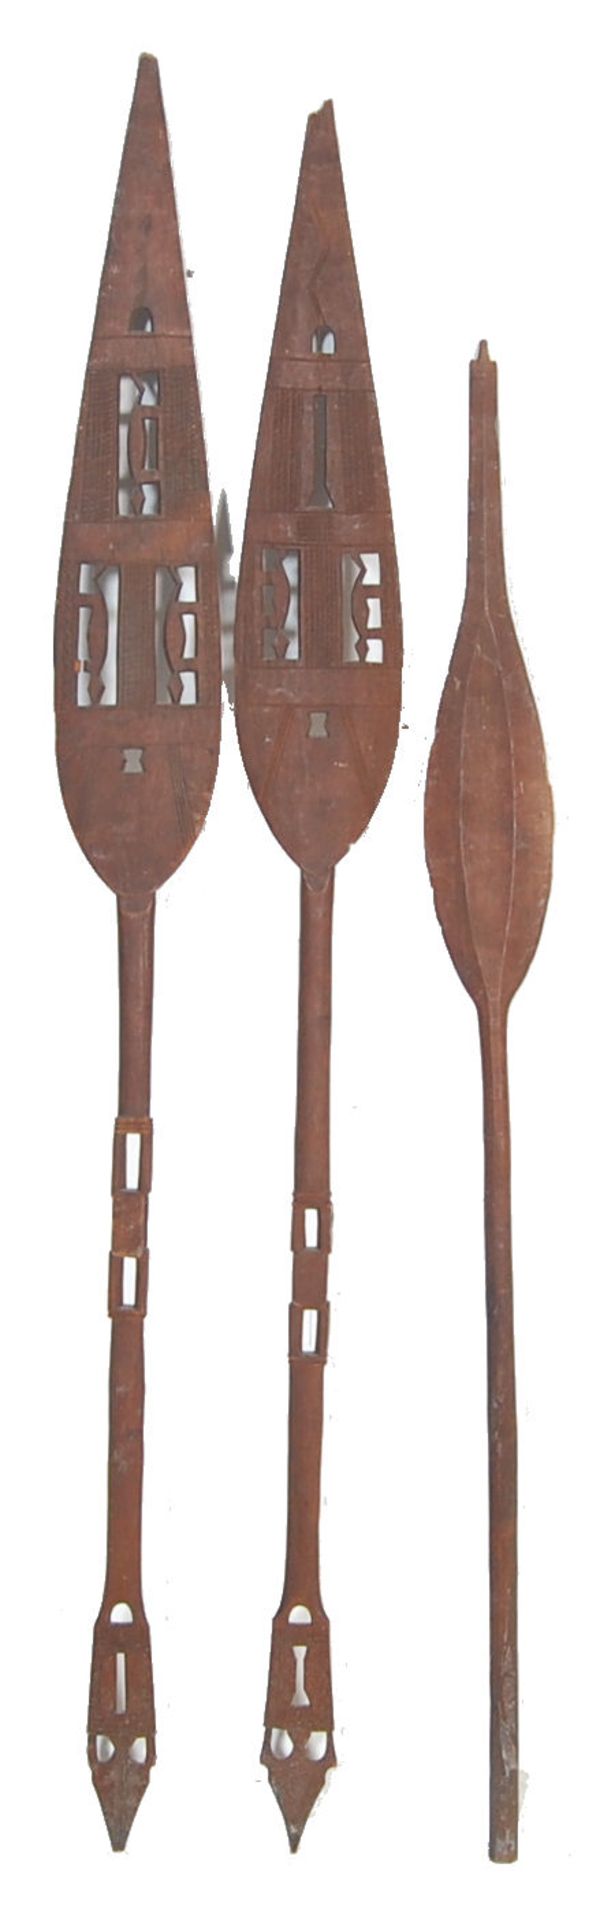 THREE 20TH CENTURY AFRICAN TRIBAL CEREMONIAL PADDLES